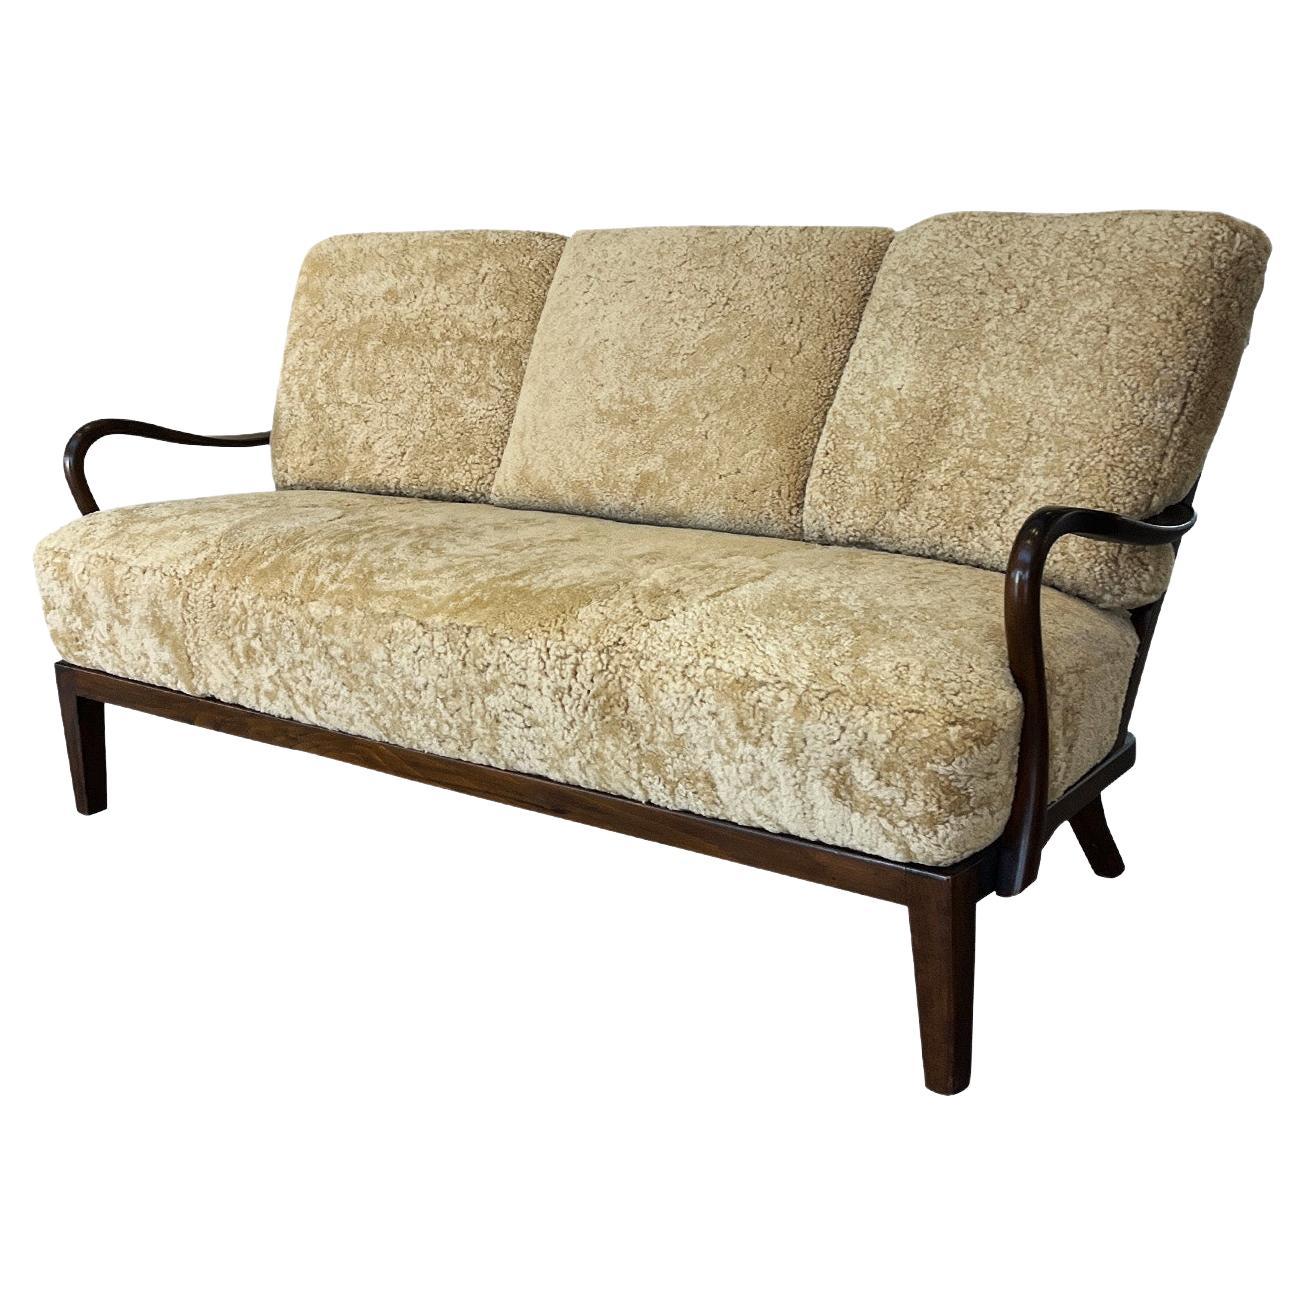 1940s Danish Settee by Alfred Christensen in Tan Shearling For Sale